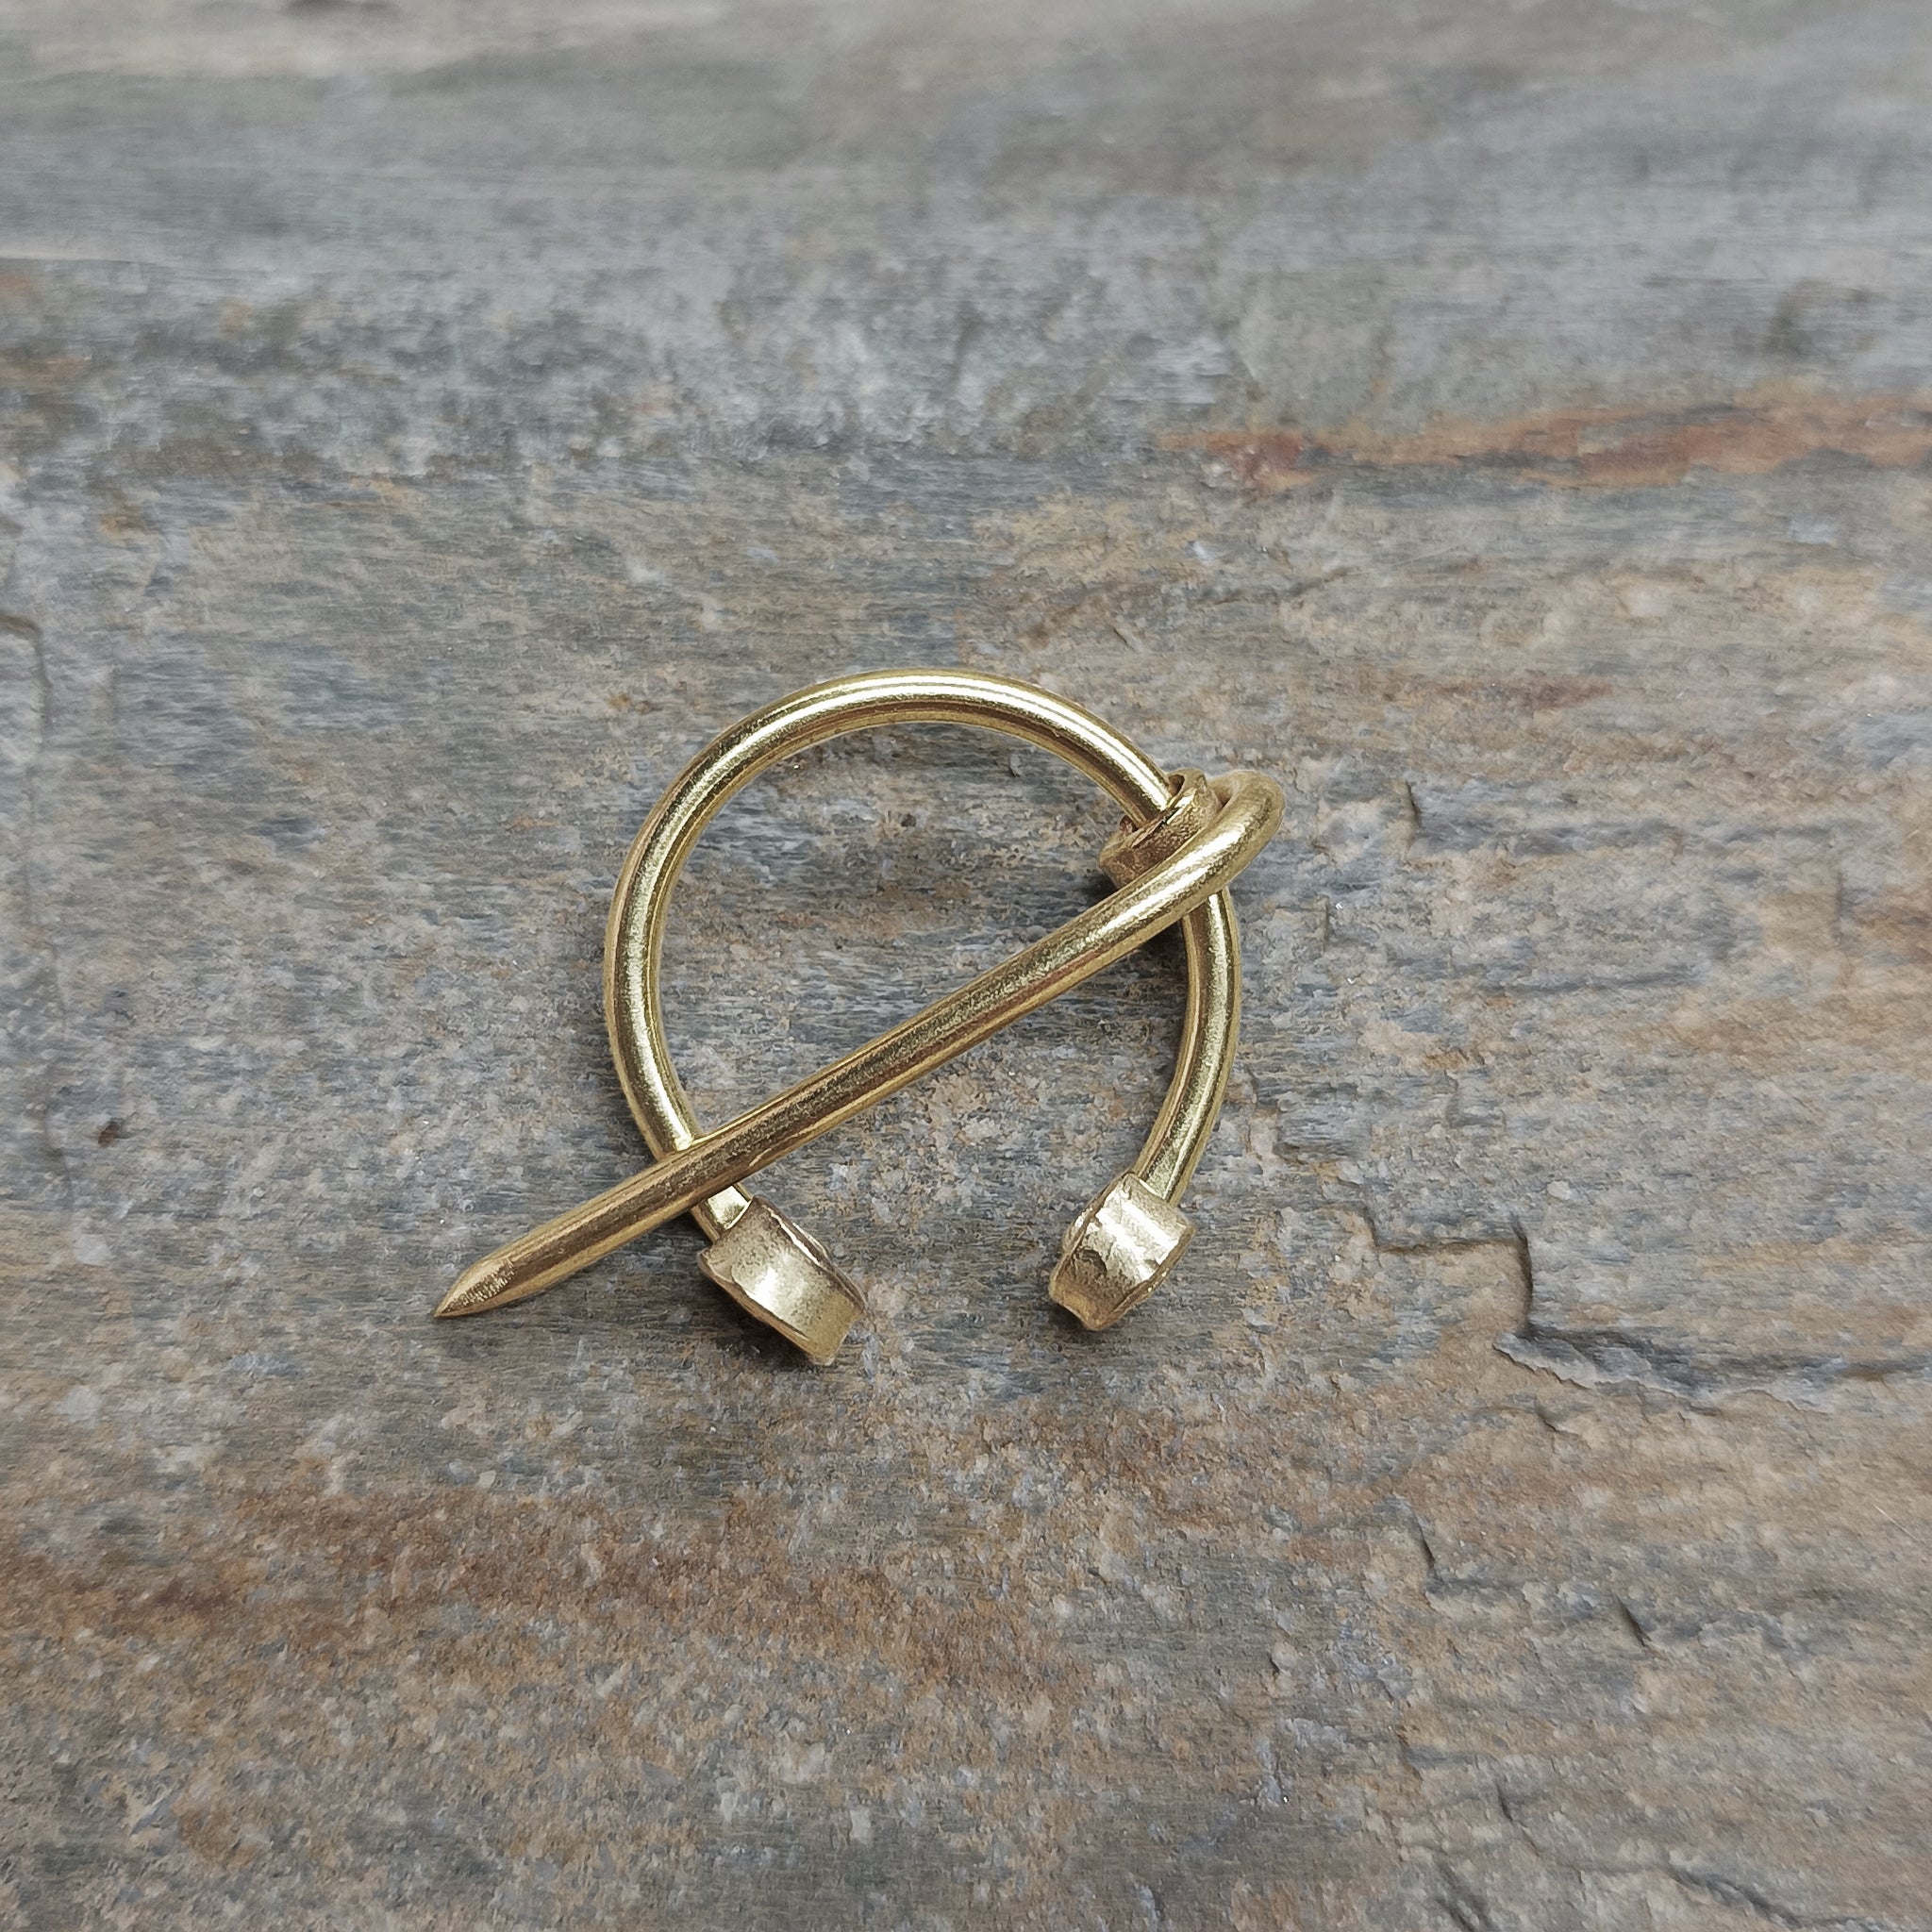 20mm Brass Cloak Pin / Clothes Pin on Rock